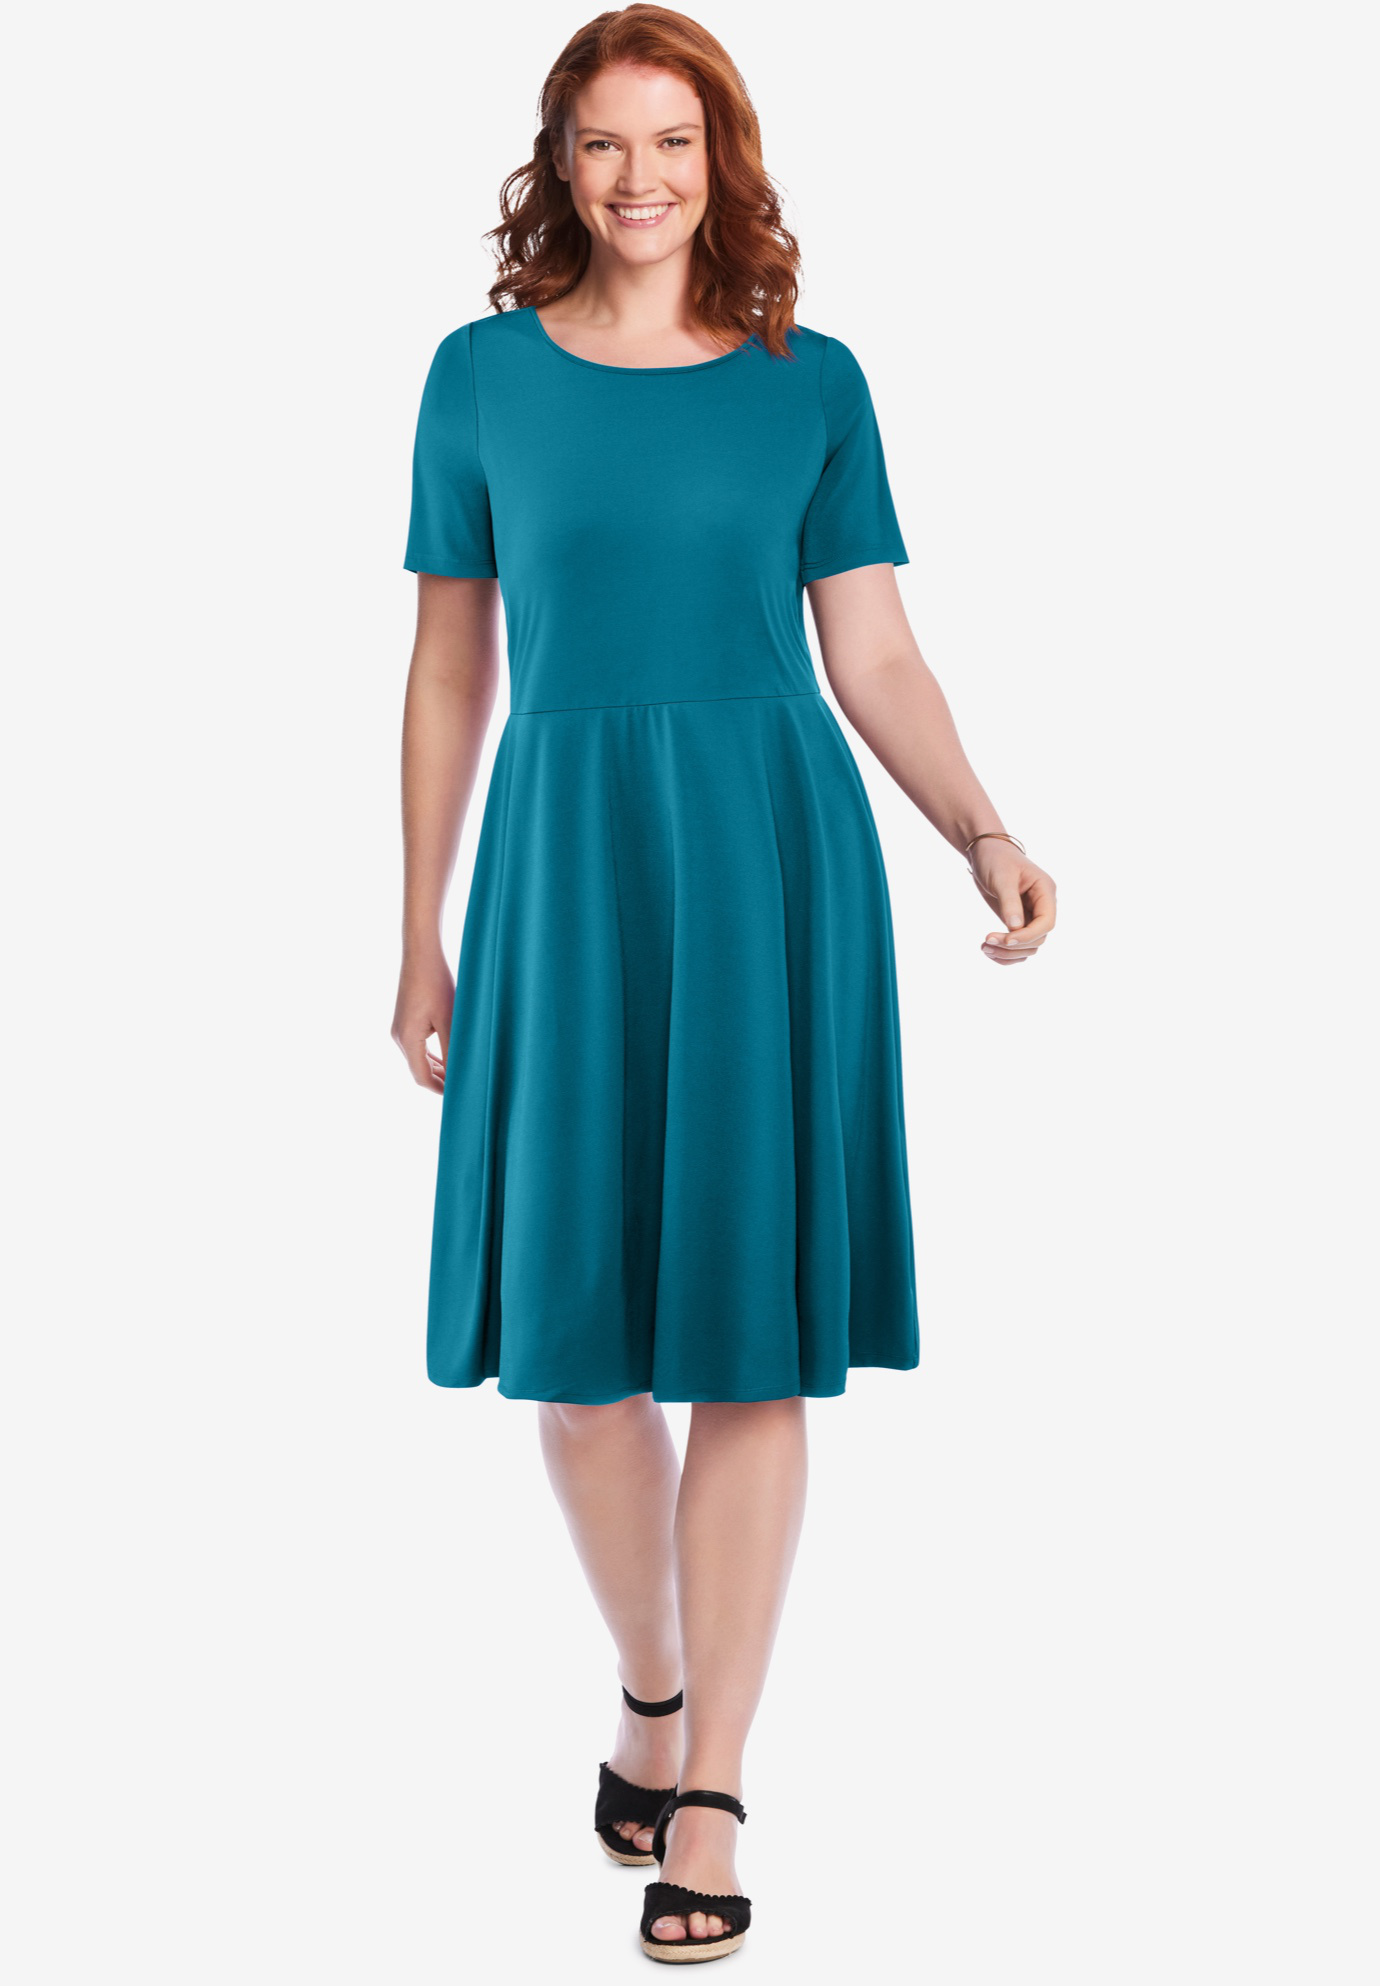 Short sleeve knit fitandflare dress Woman Within